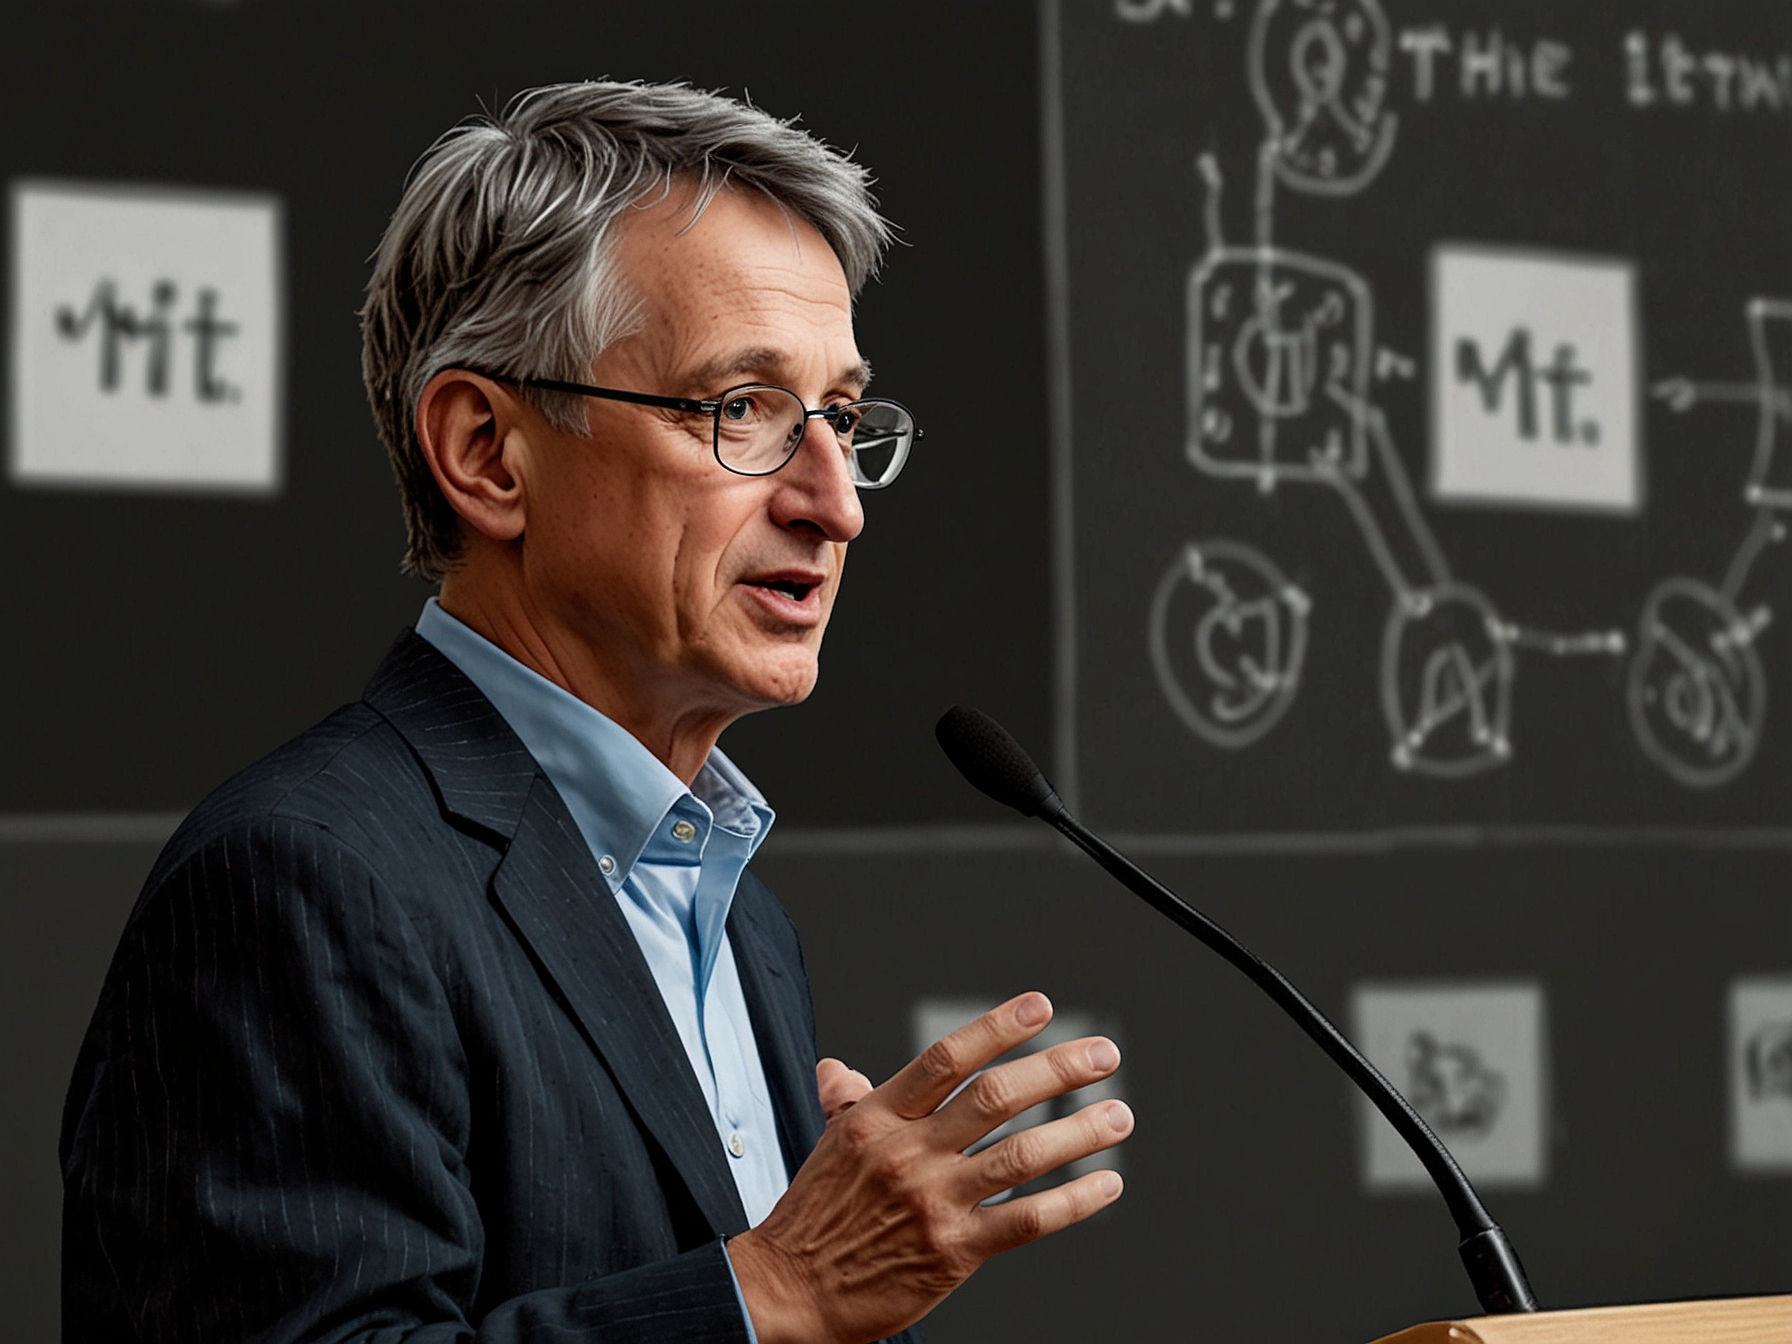 Geoffrey Hinton speaking during an MIT lecture, where he discussed the potential for superintelligent AI to replace humans, shaking the tech and ethics communities.